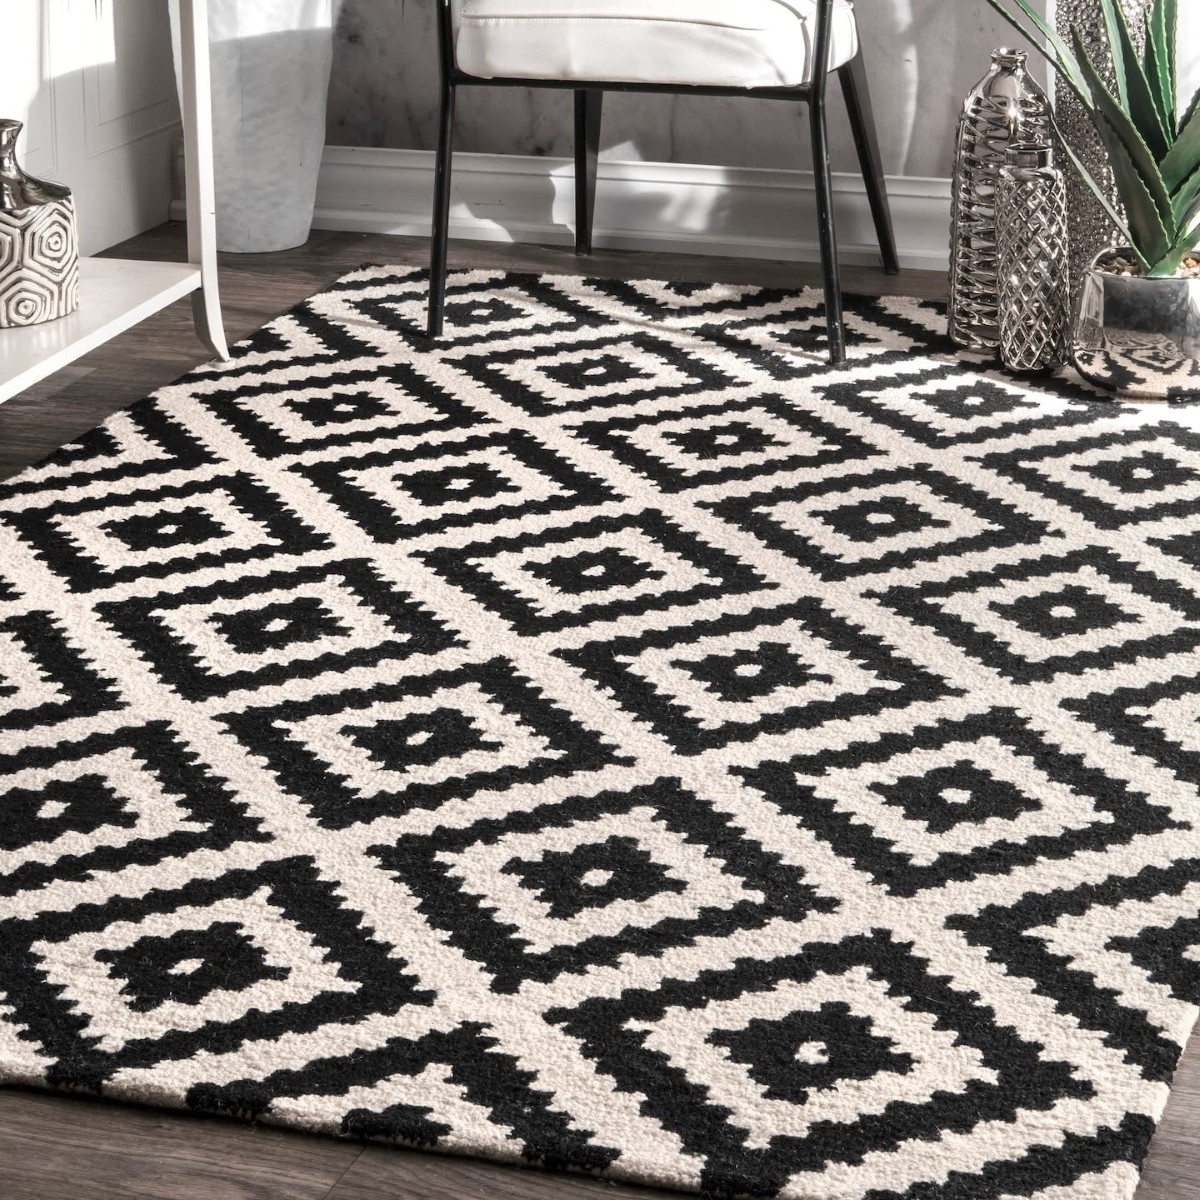 types of rugs - black and white rug